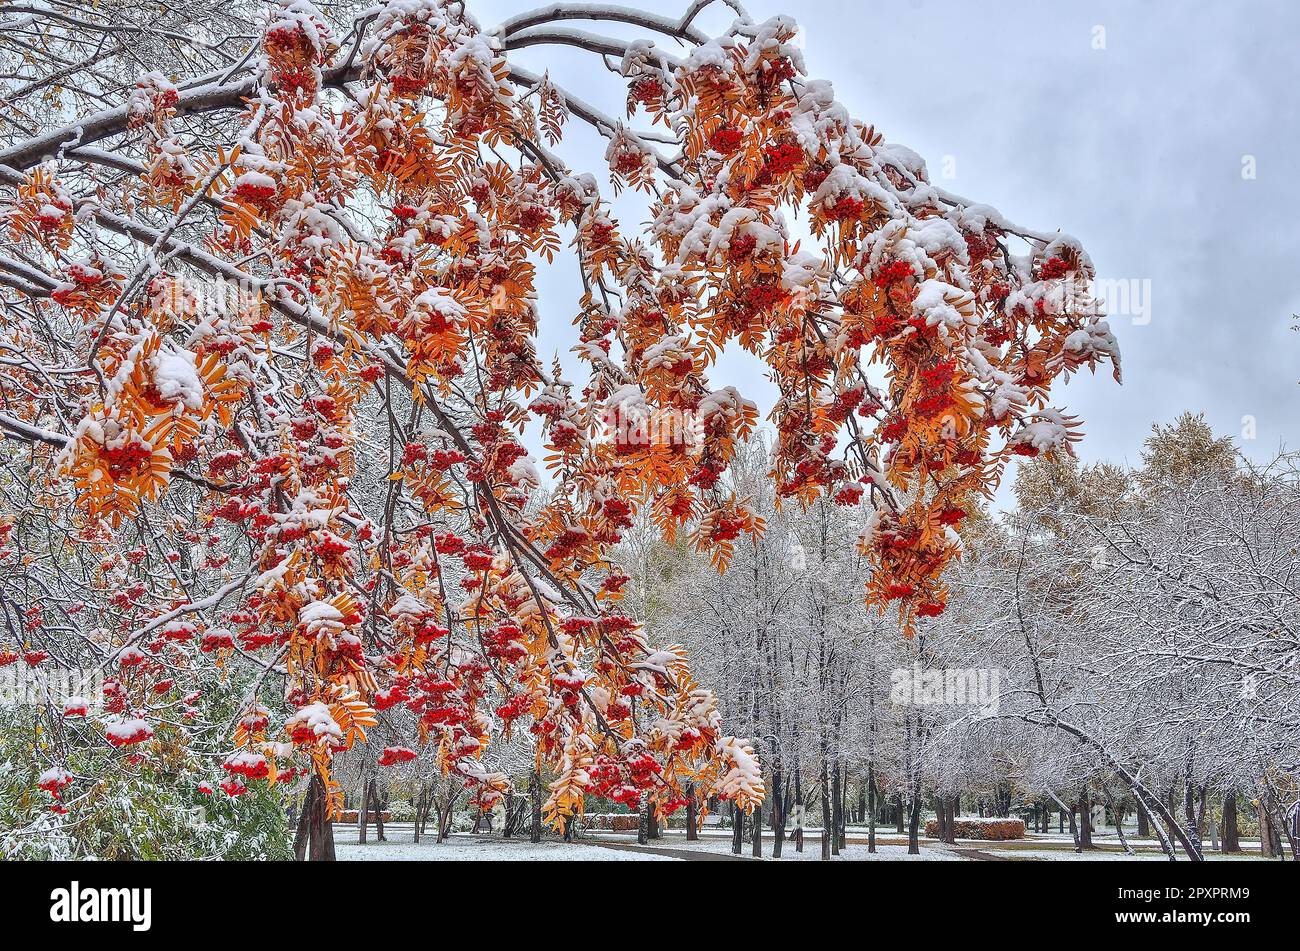 First snowfall in colorful fall city park - late autumn landscape. Rowan tree branch with red berries and golden foliage at foreground. Wonderful scen Stock Photo